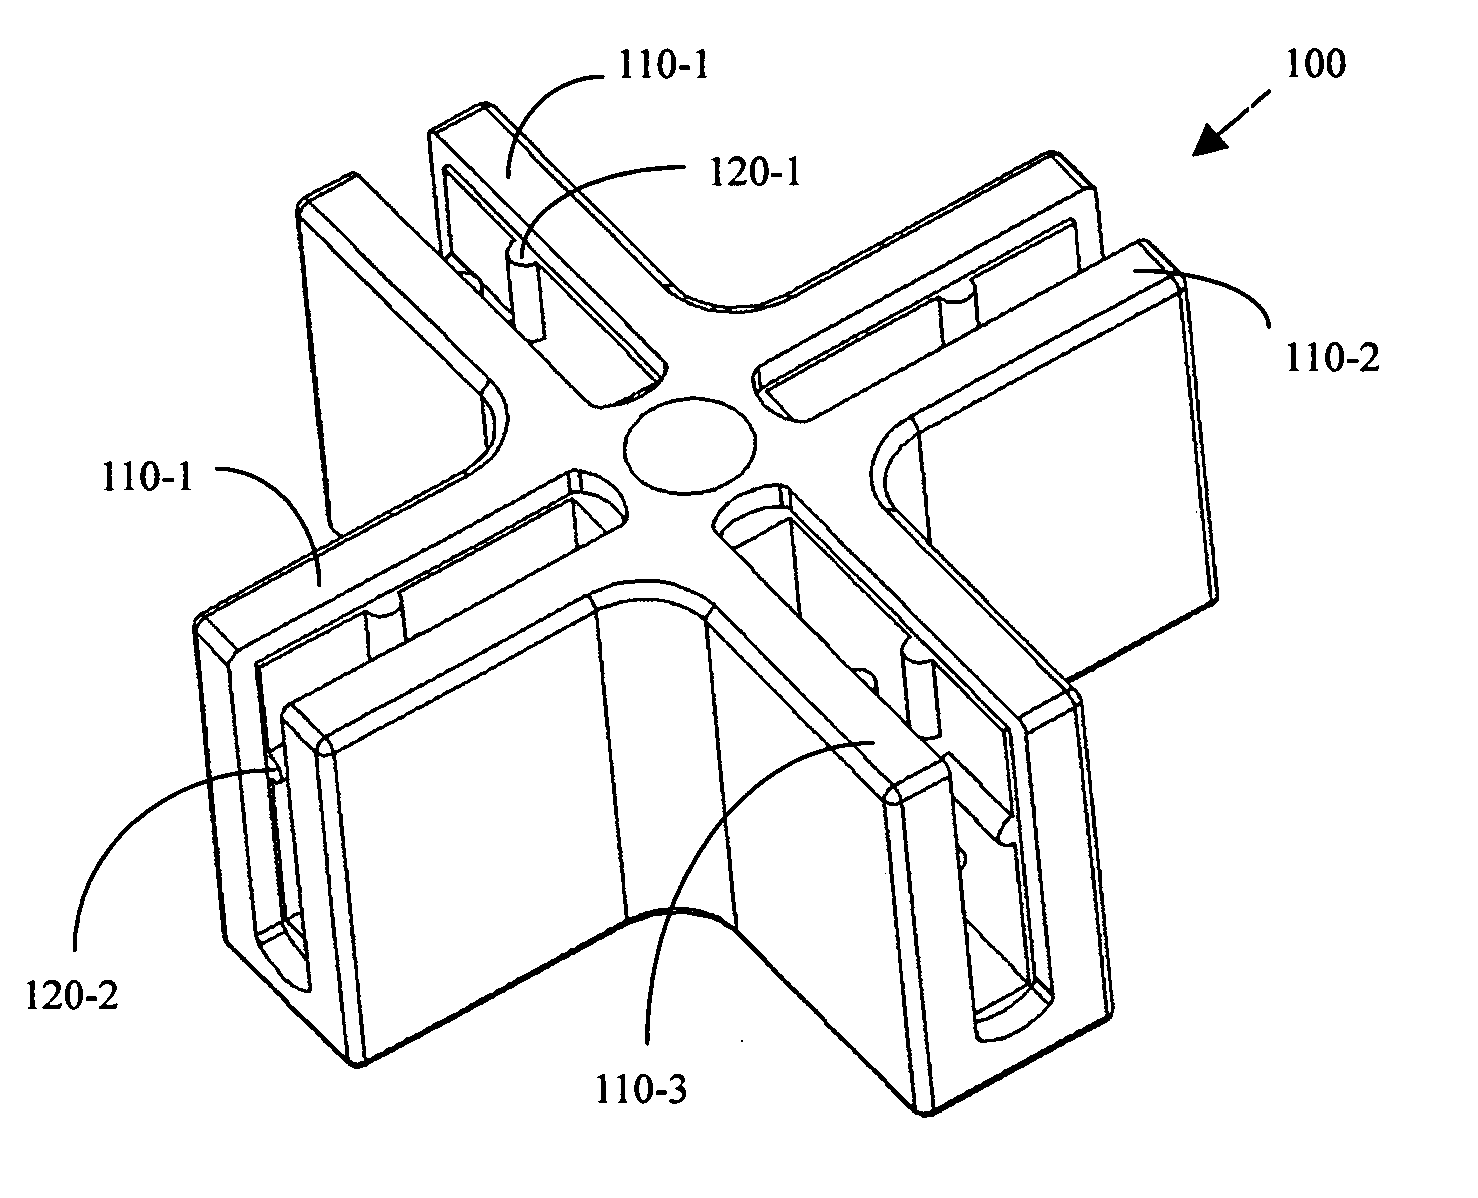 Connection block with bar-adapting trenches for adapting and holding framing bars at fixed orientations